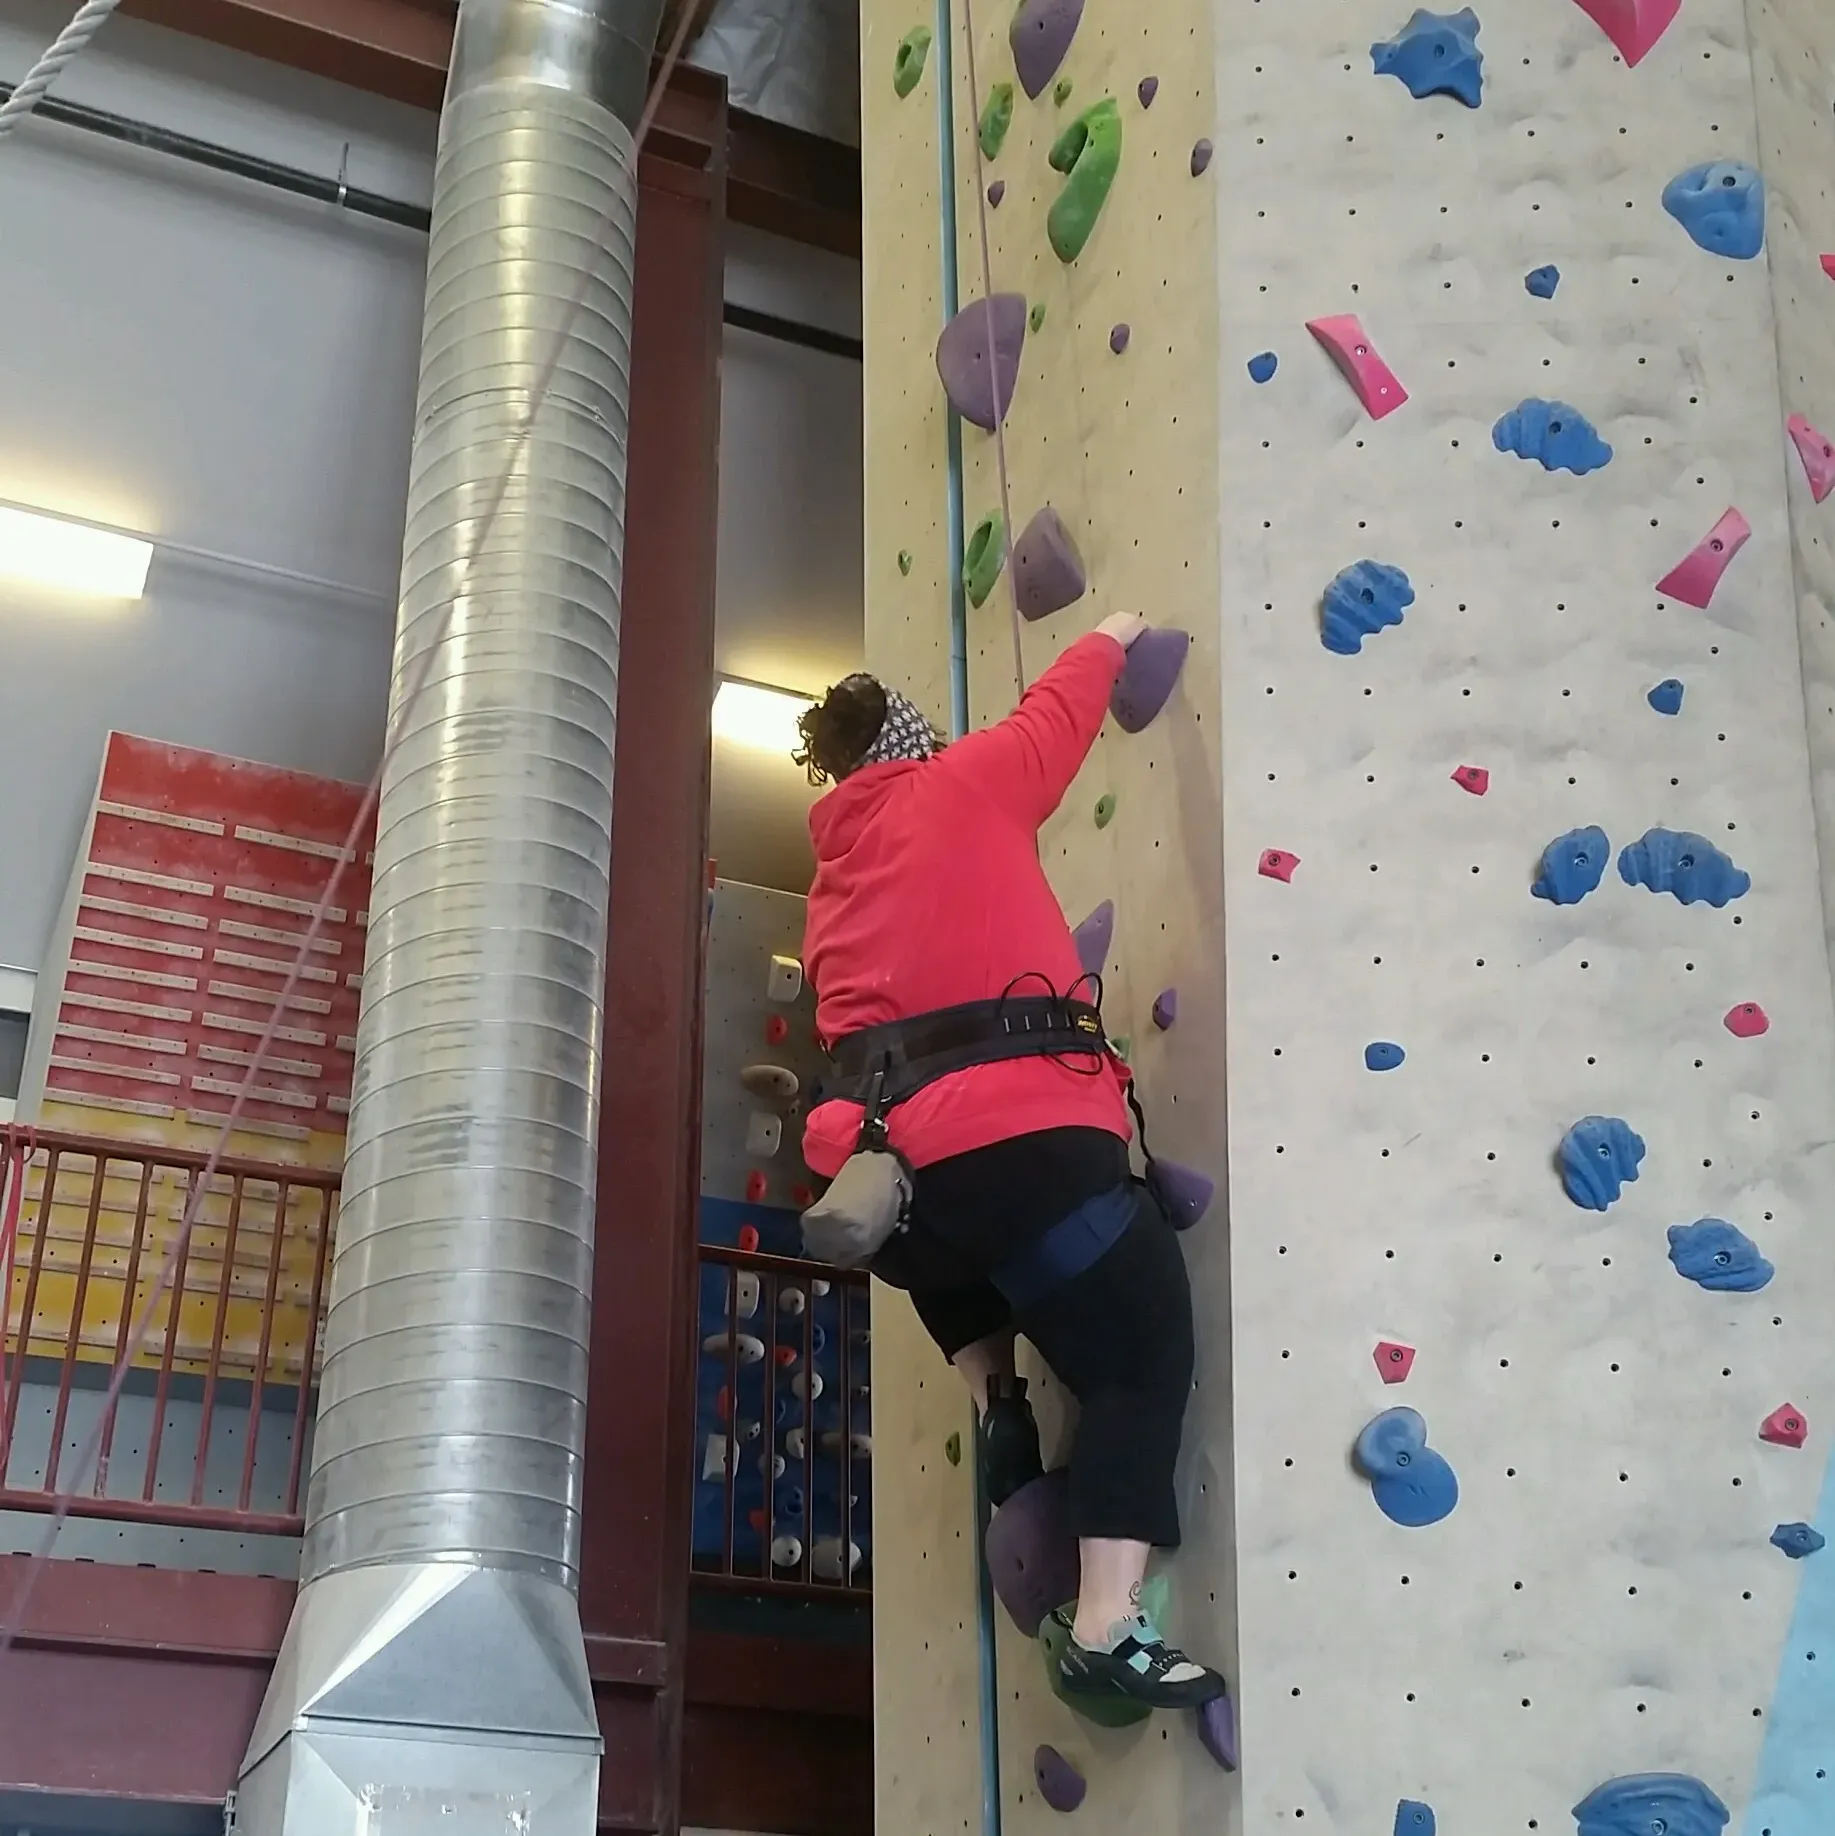 Big bodies can do everything, even rock climbing!